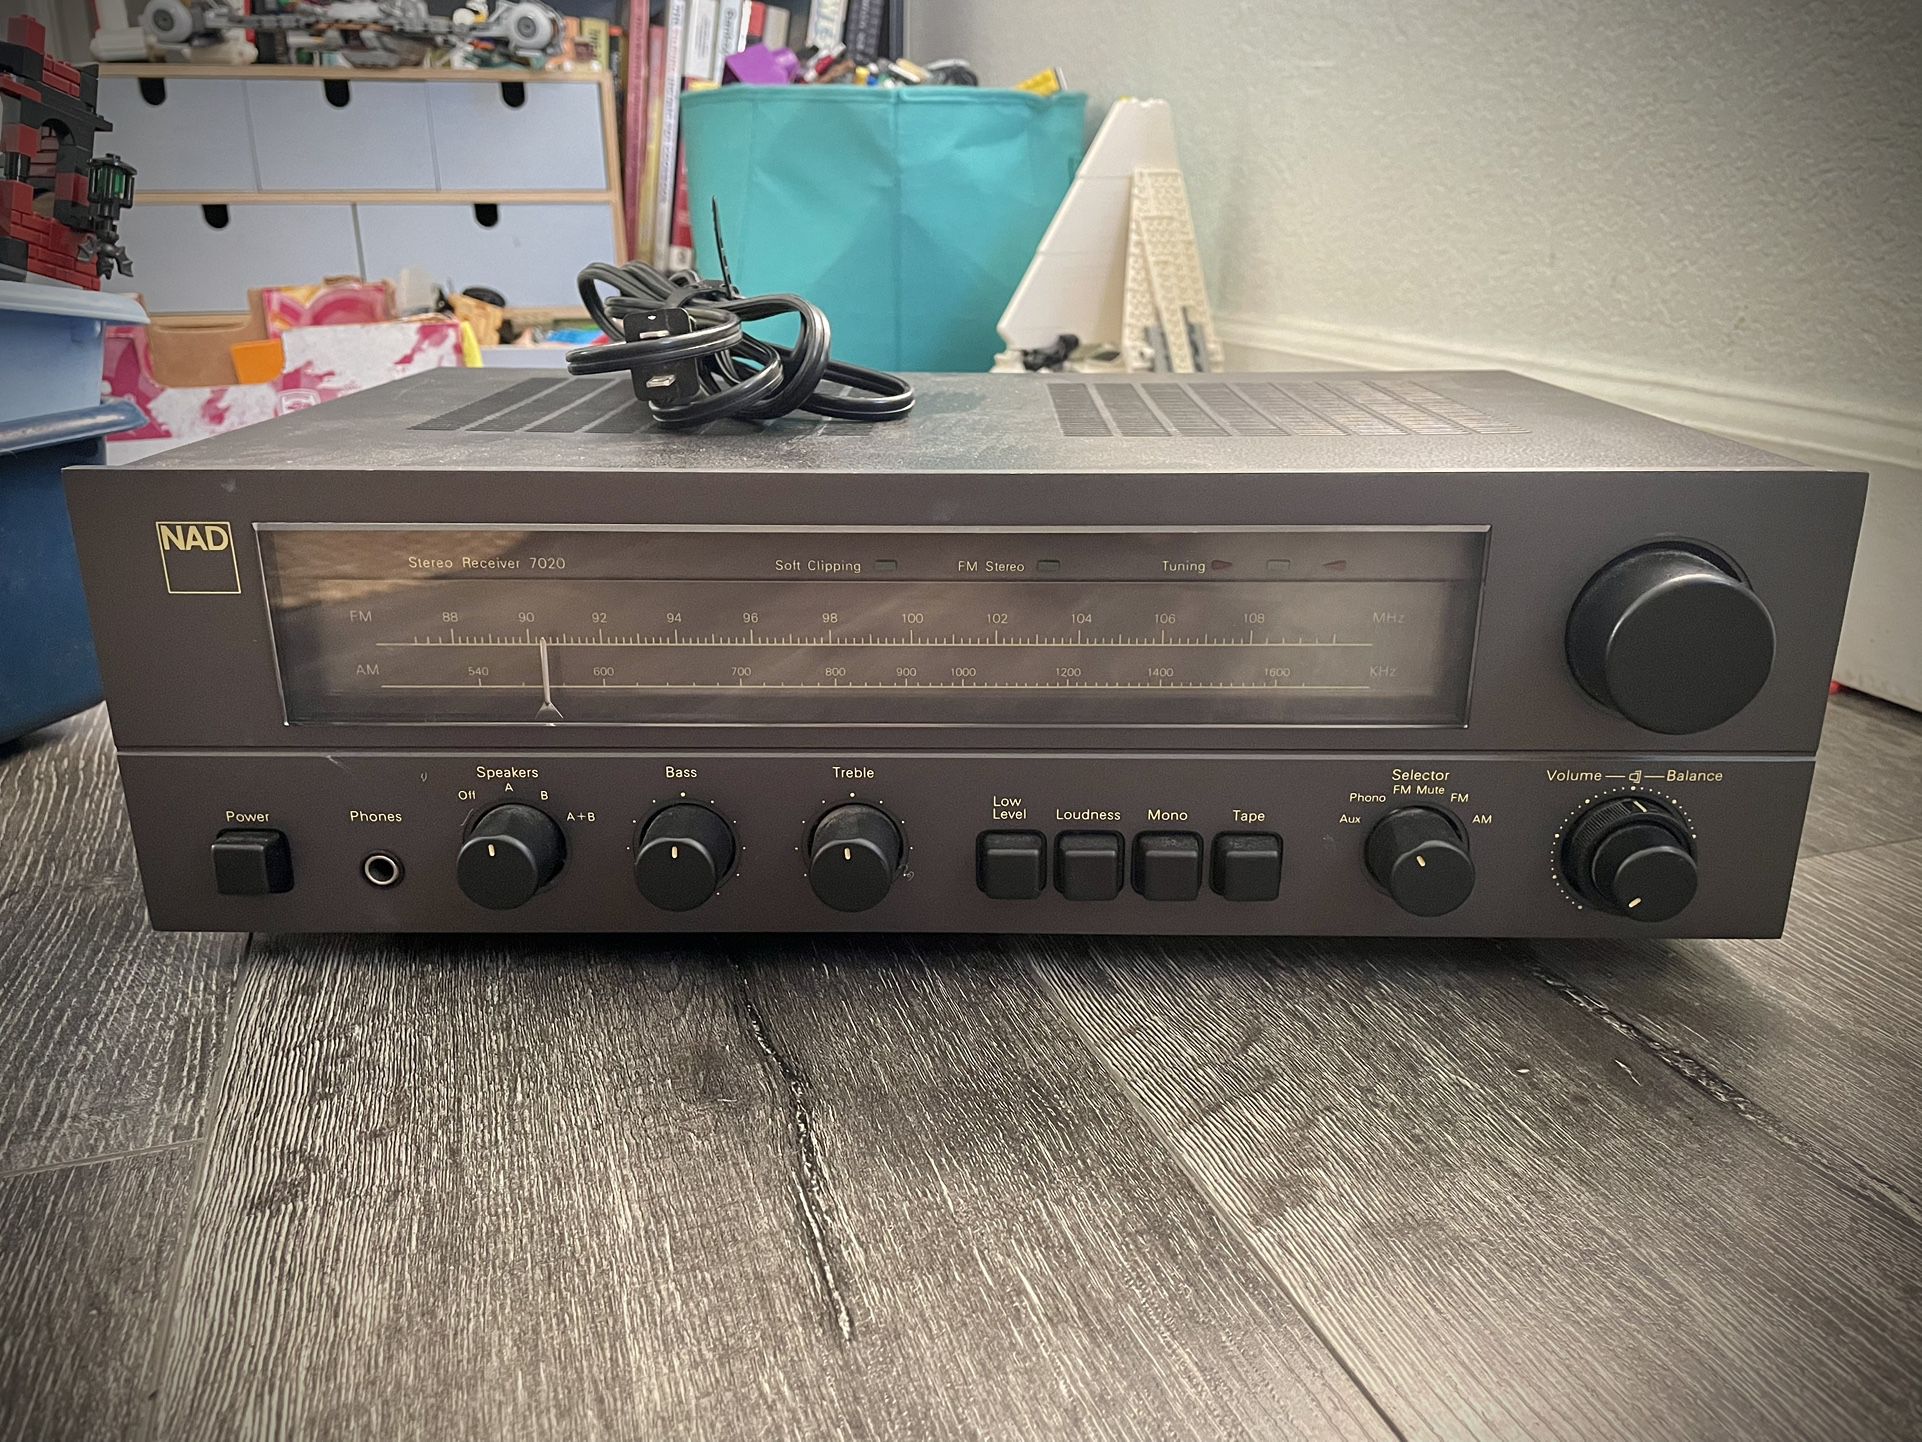 NAD 7020 Stereo Receiver